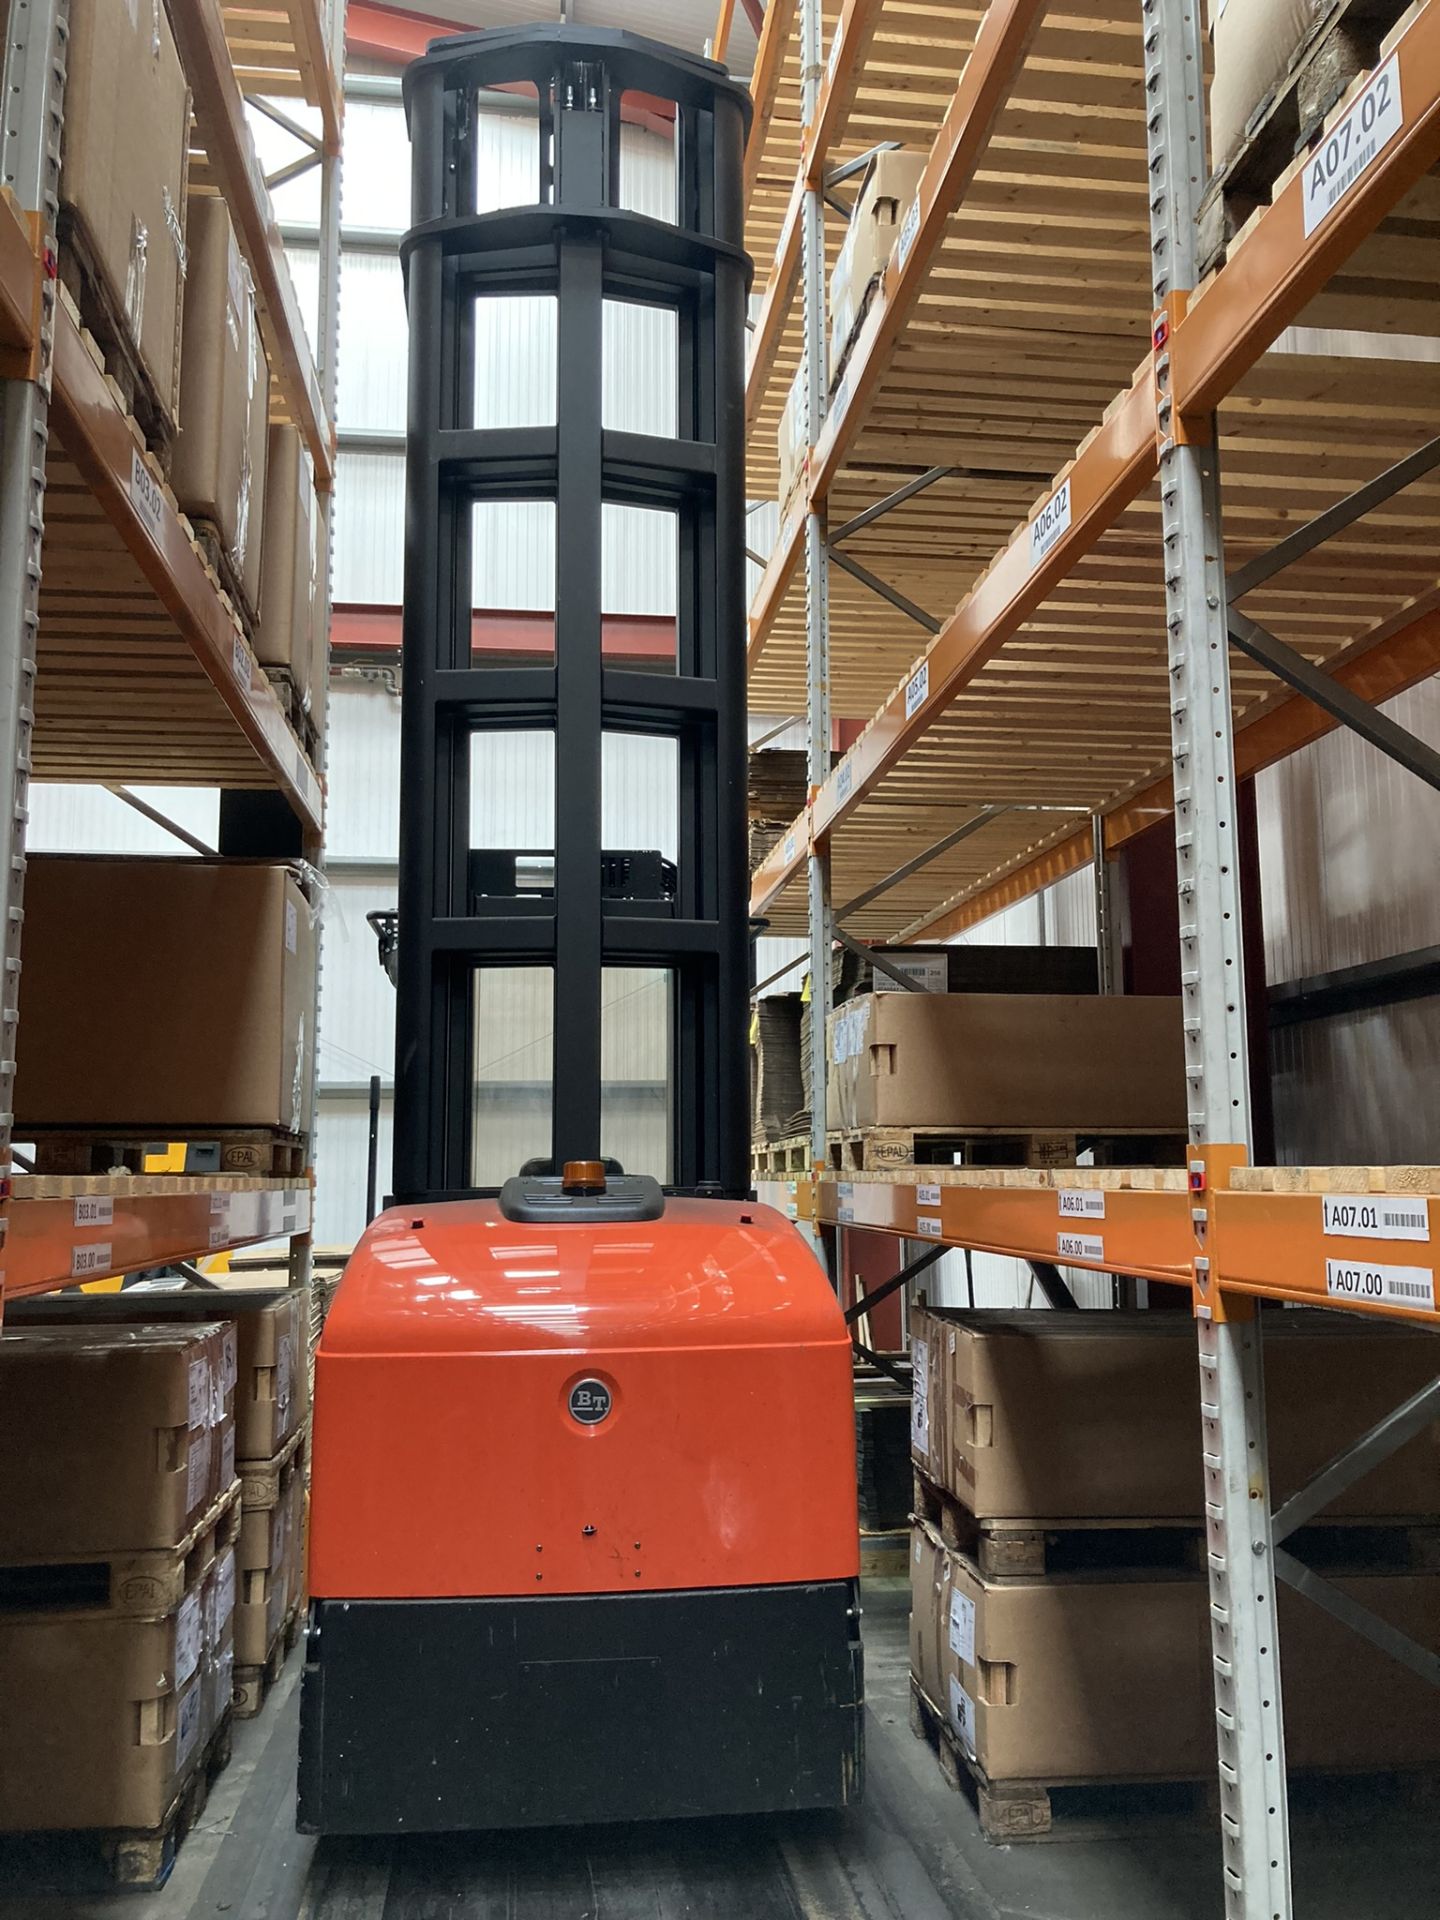 1 BT (Toyota) Vector, VCE 150A, Very narrow aisle electric forklift with charger, Serial Number: 64 - Image 3 of 5